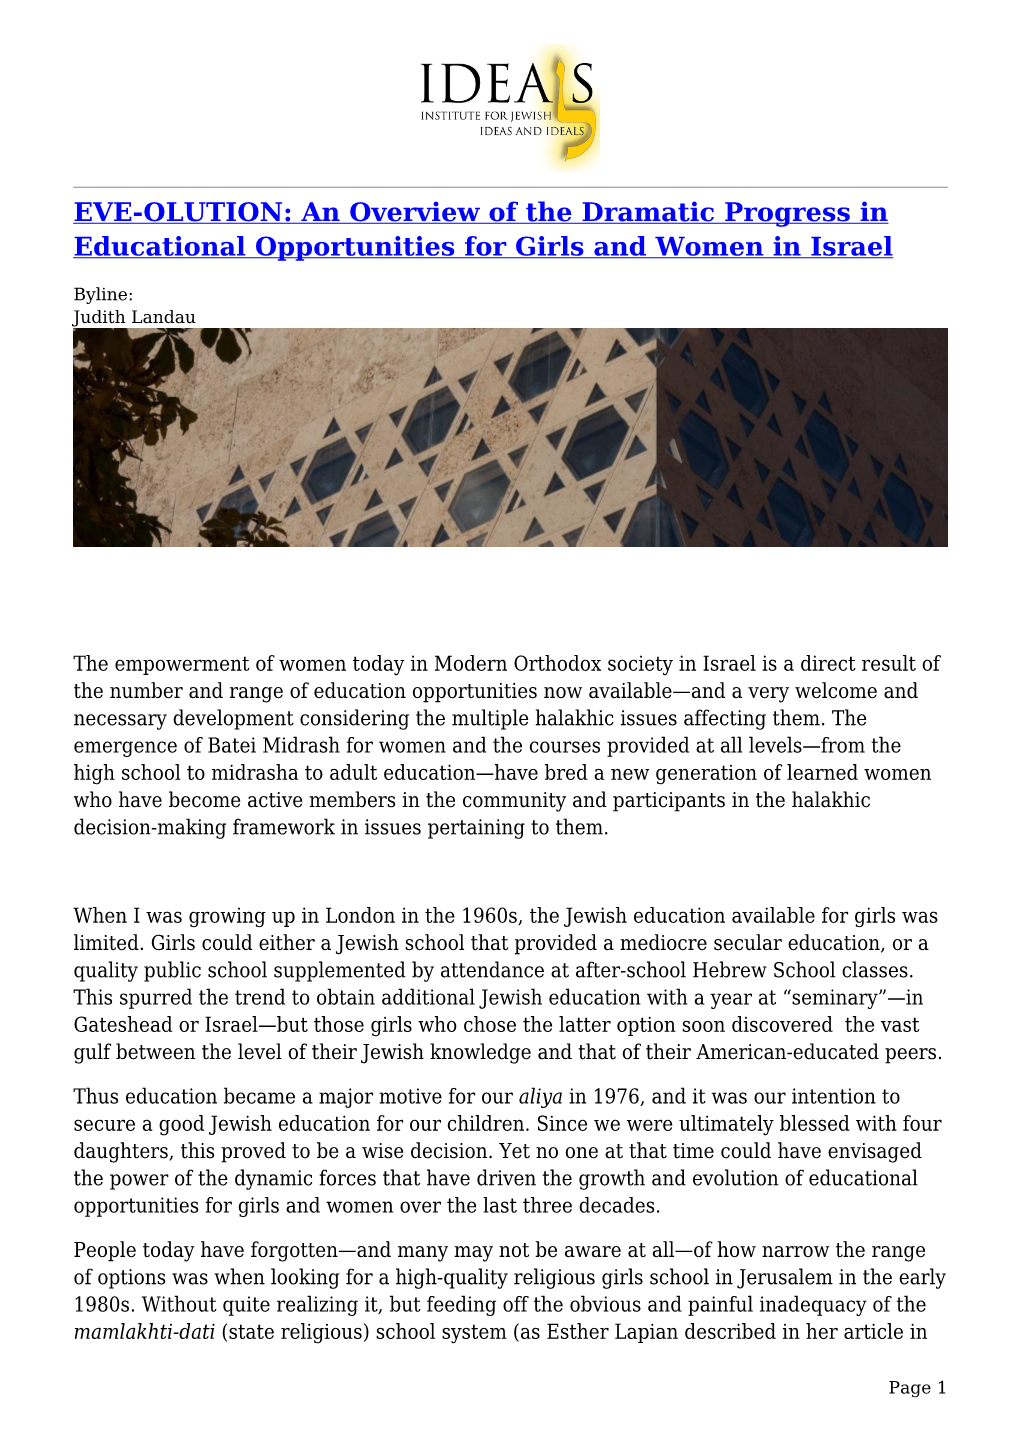 EVE-OLUTION: an Overview of the Dramatic Progress in Educational Opportunities for Girls and Women in Israel